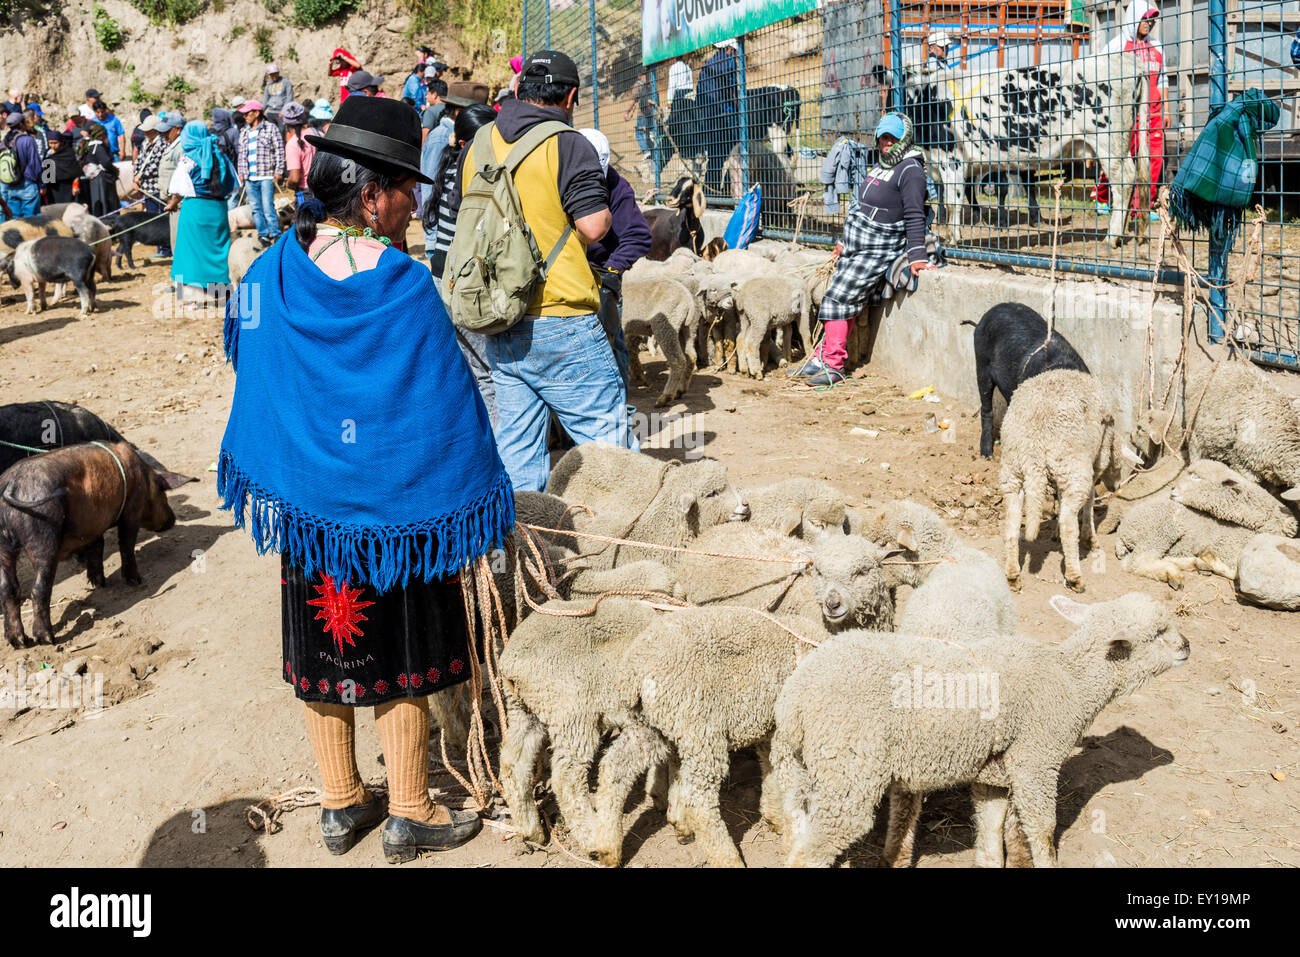 Sheep and other animals are bought and sold at livestock market. Otavalo, Ecuador. Stock Photo